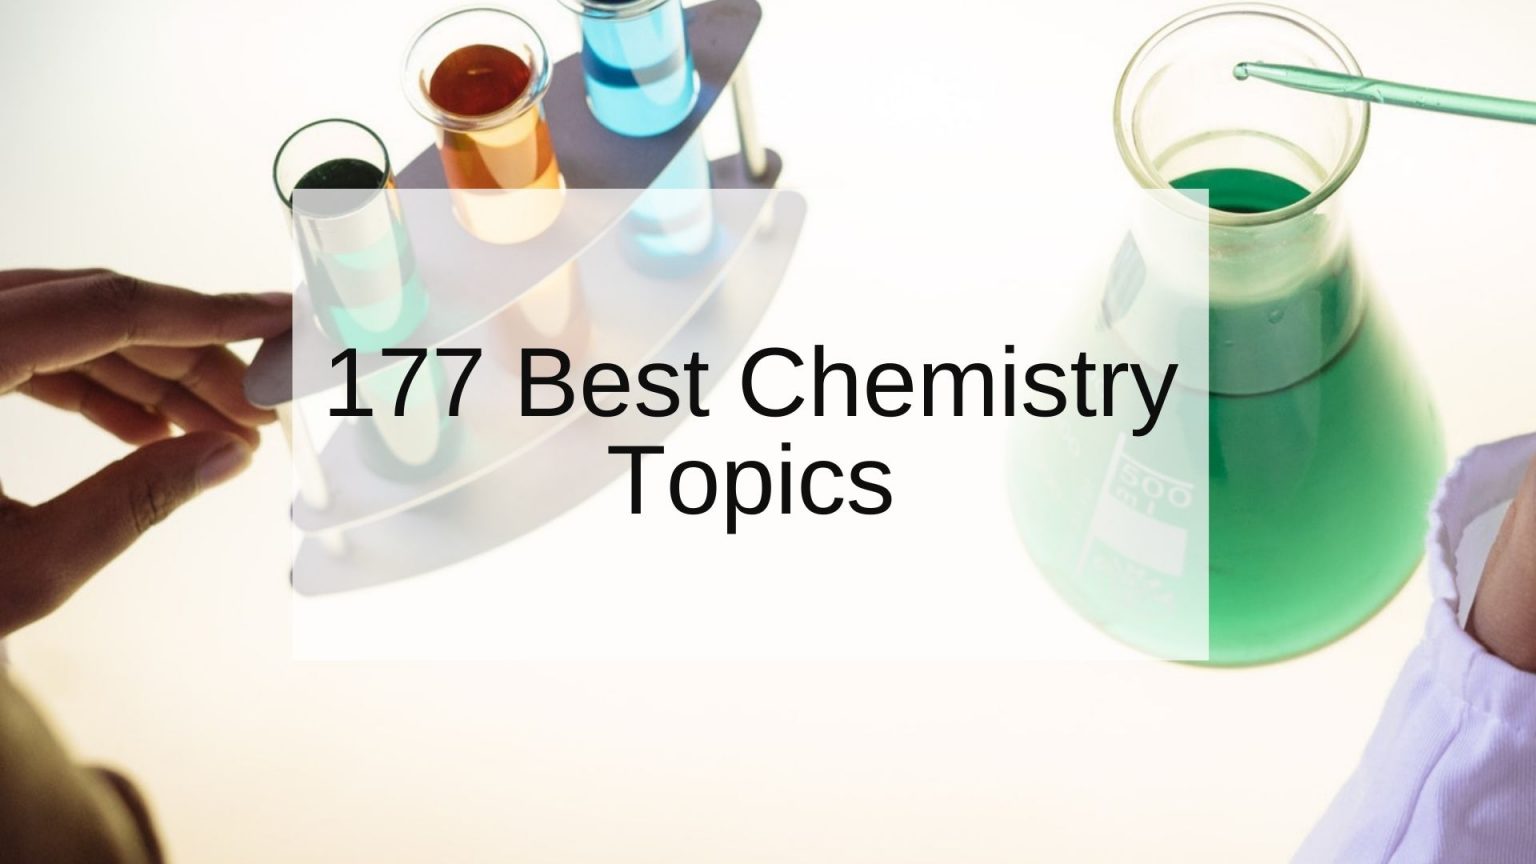 project topics on chemistry education